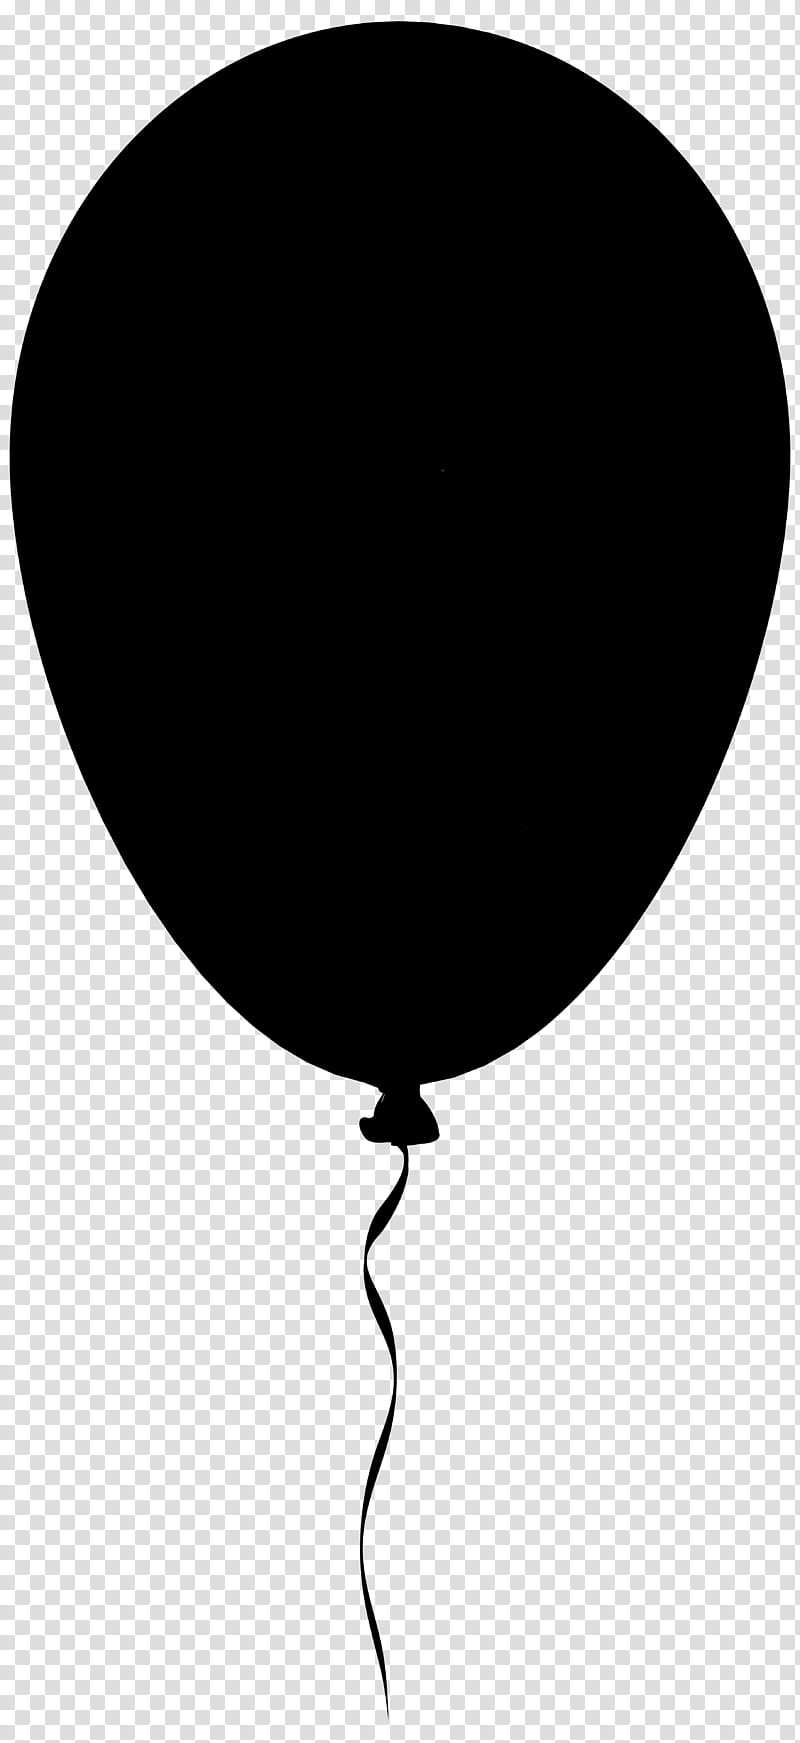 Black Balloon, Consumer, Mail Order, Rakuten, Costume, Shopping, Household Goods, Party transparent background PNG clipart